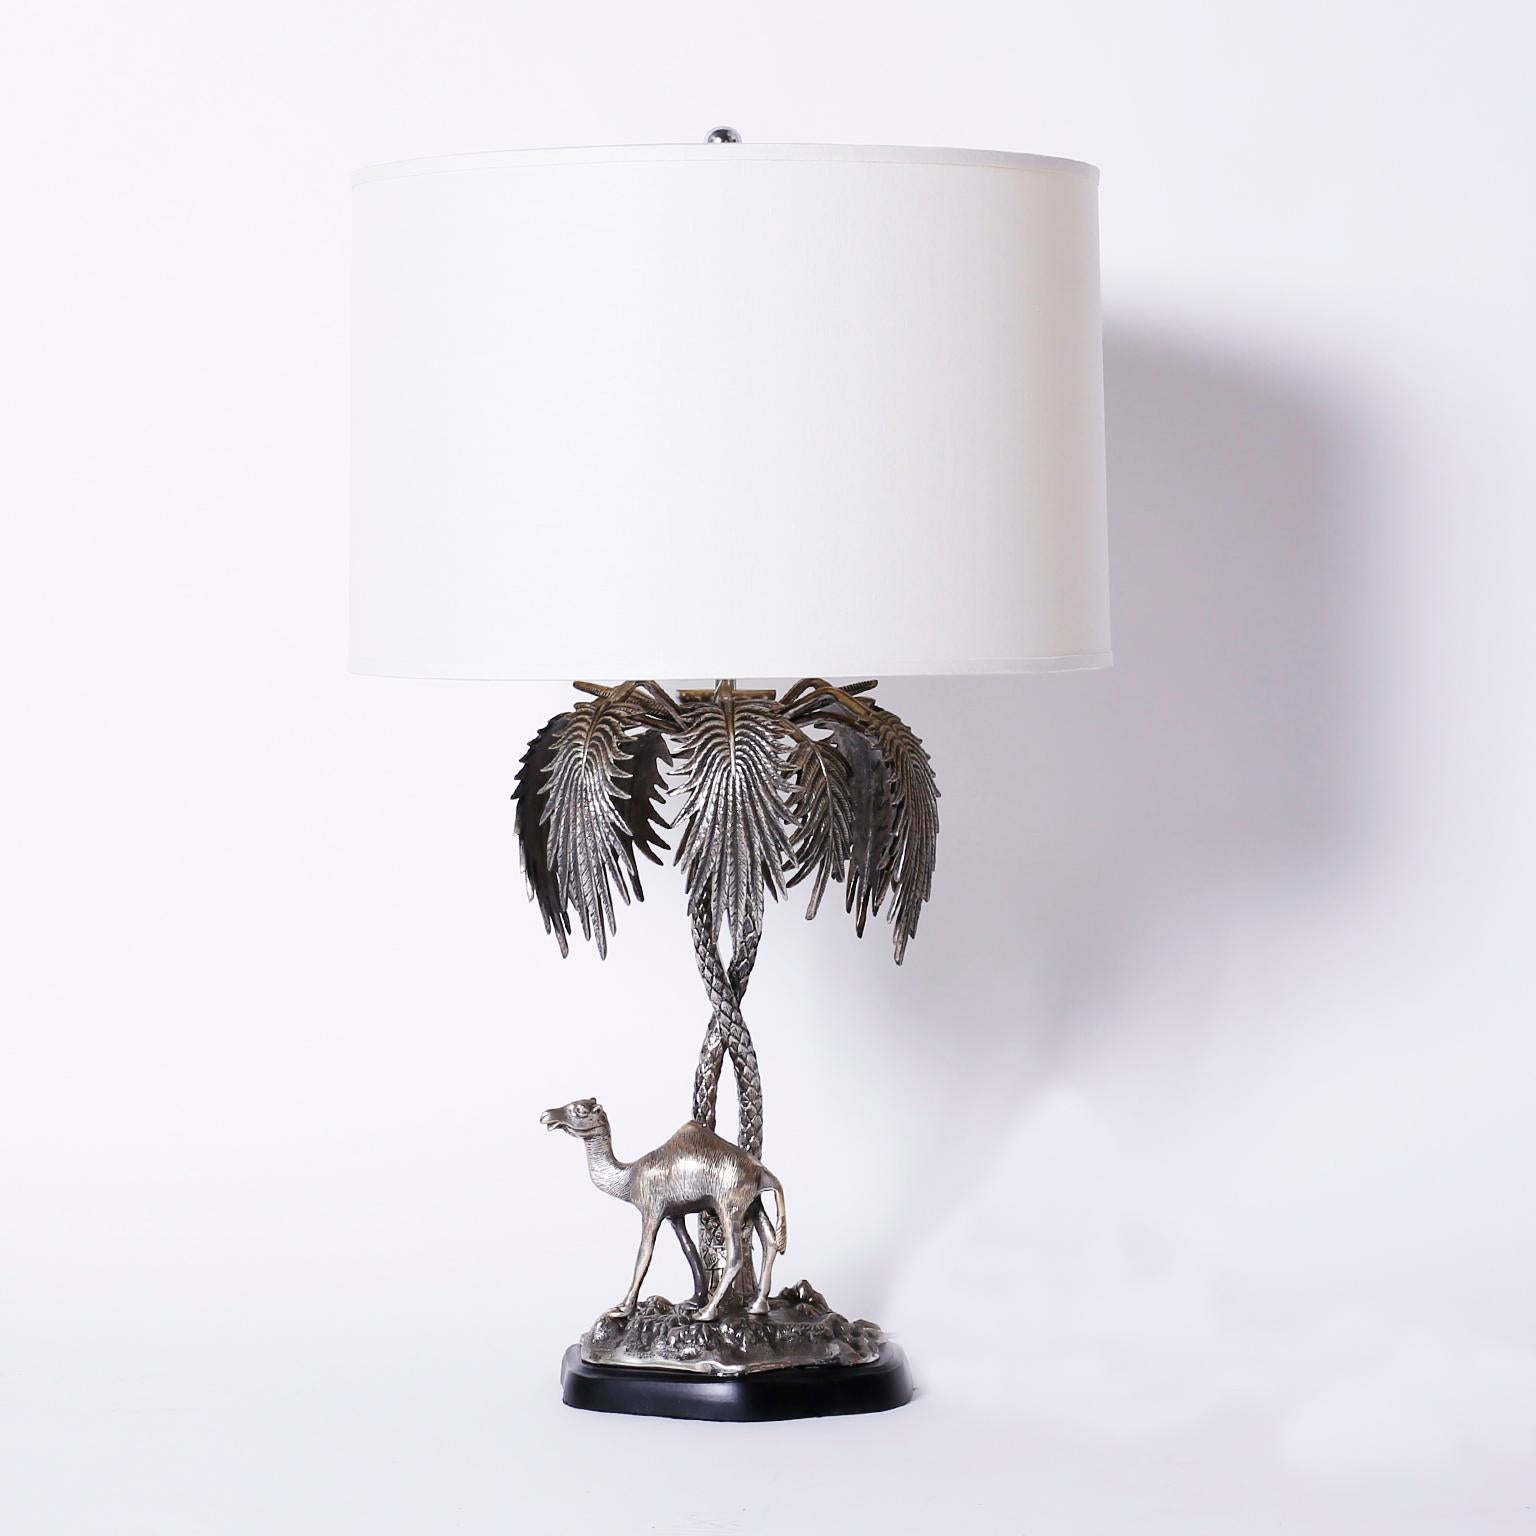 Charming pair of Anglo-Indian silver plate on bronze epergnes mounted as table lamps
depicting an elephant and a camel under palm trees on a patch of terra firma.